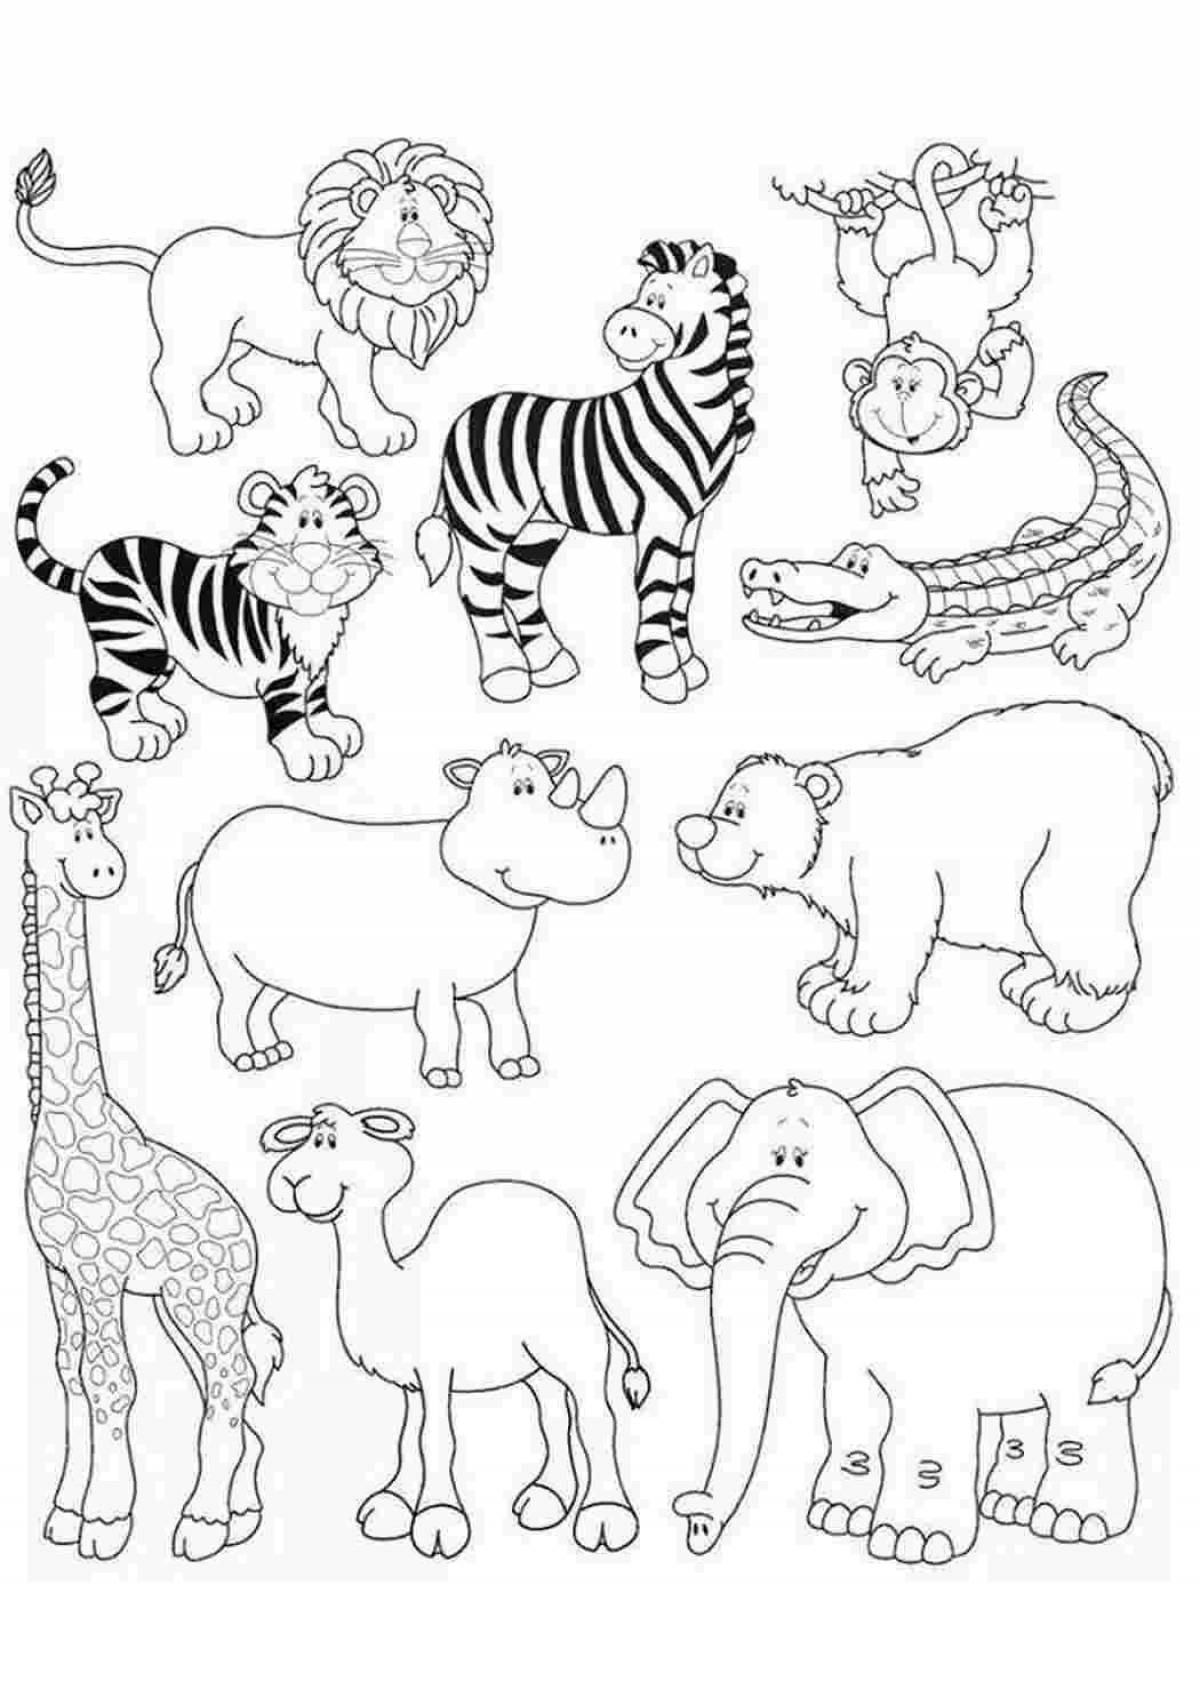 Fancy coloring animals of hot countries for children 5-6 years old